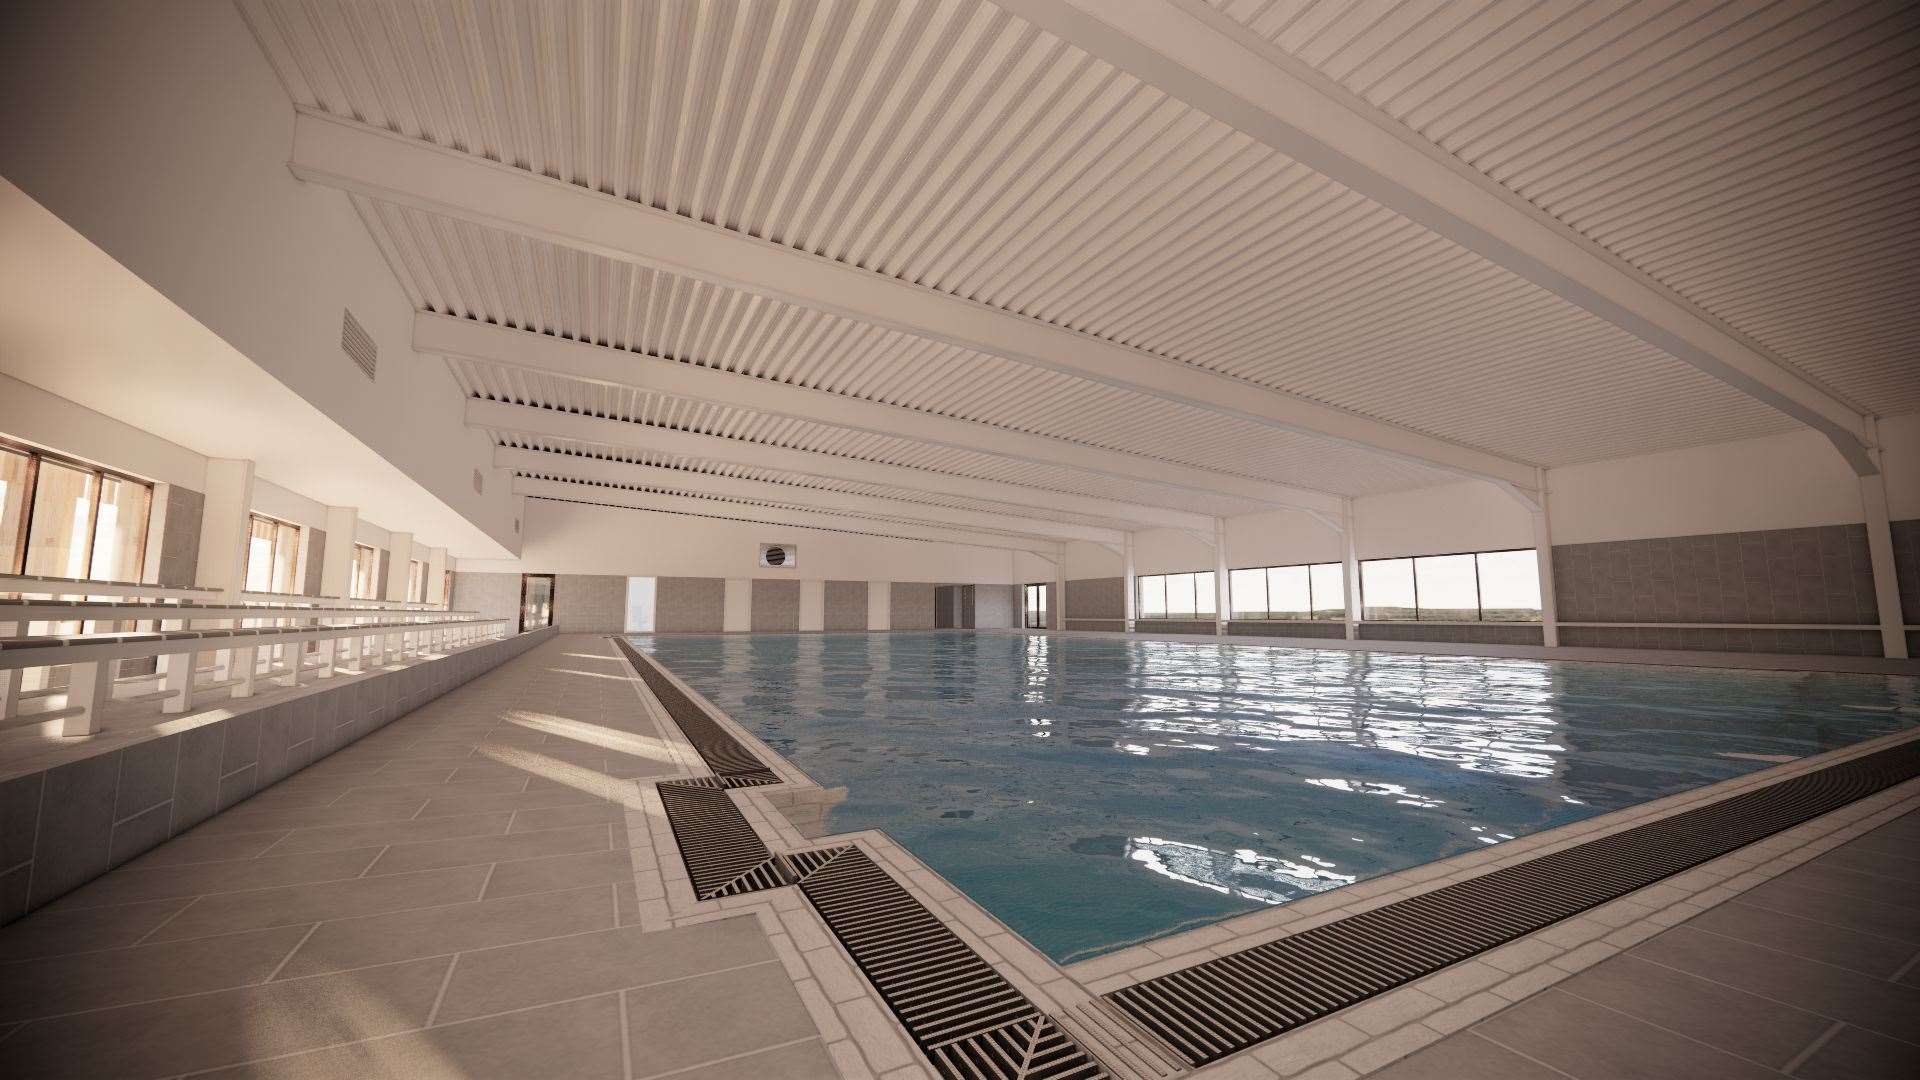 Inside the new pool